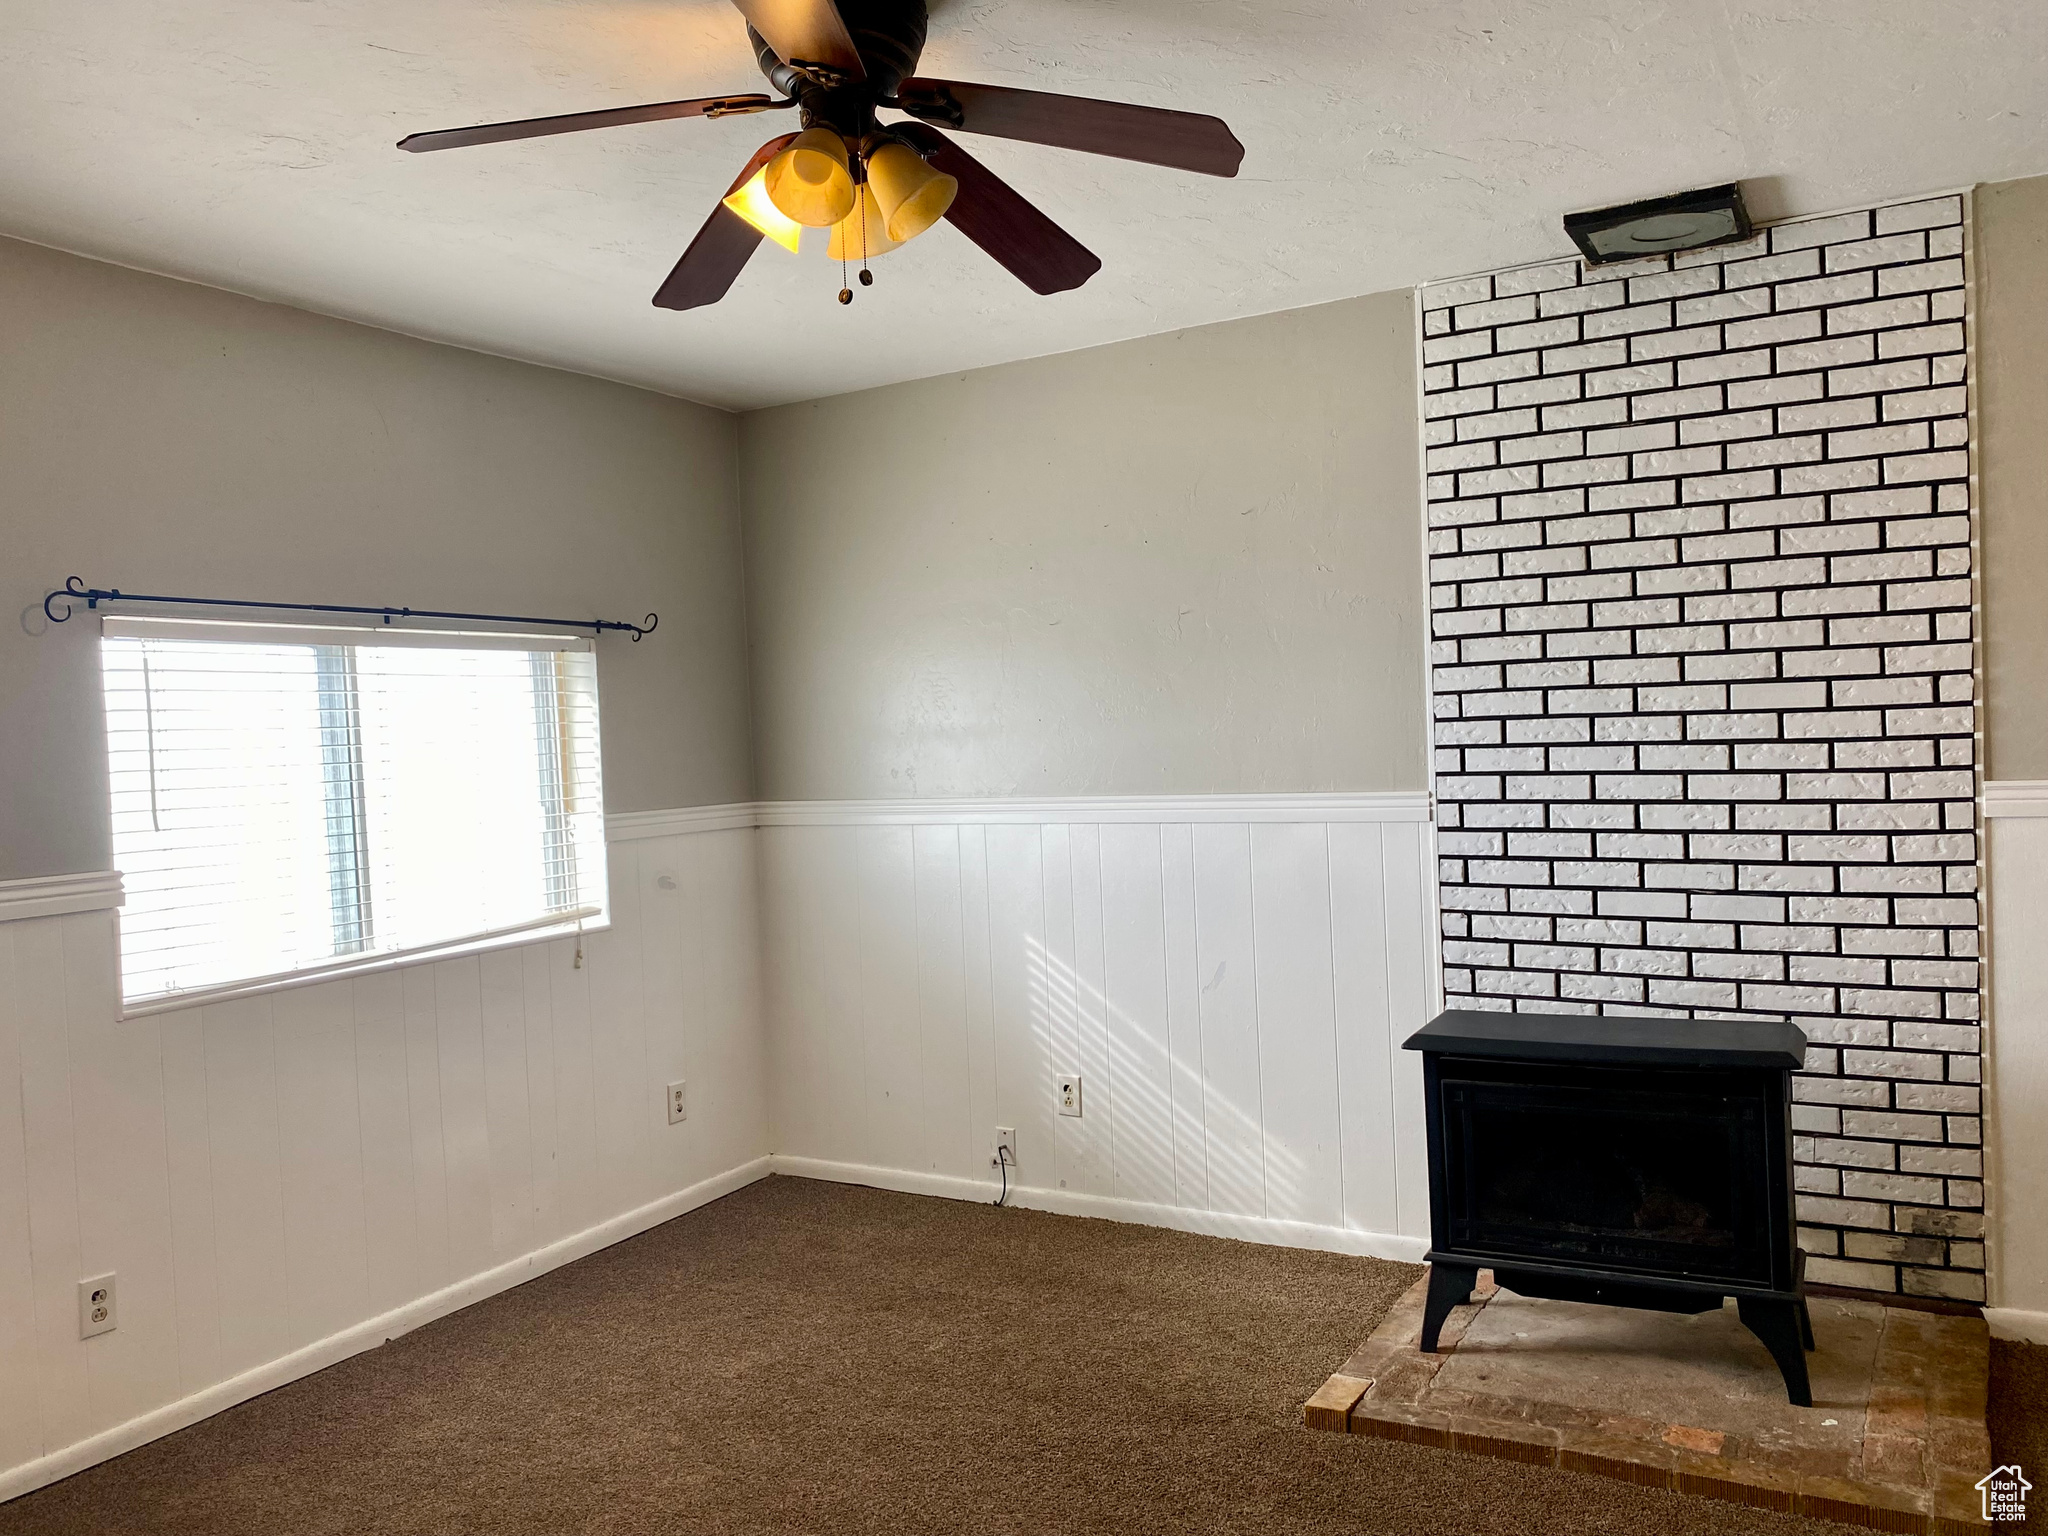 Interior space featuring brick wall, a brick fireplace, dark carpet, and ceiling fan